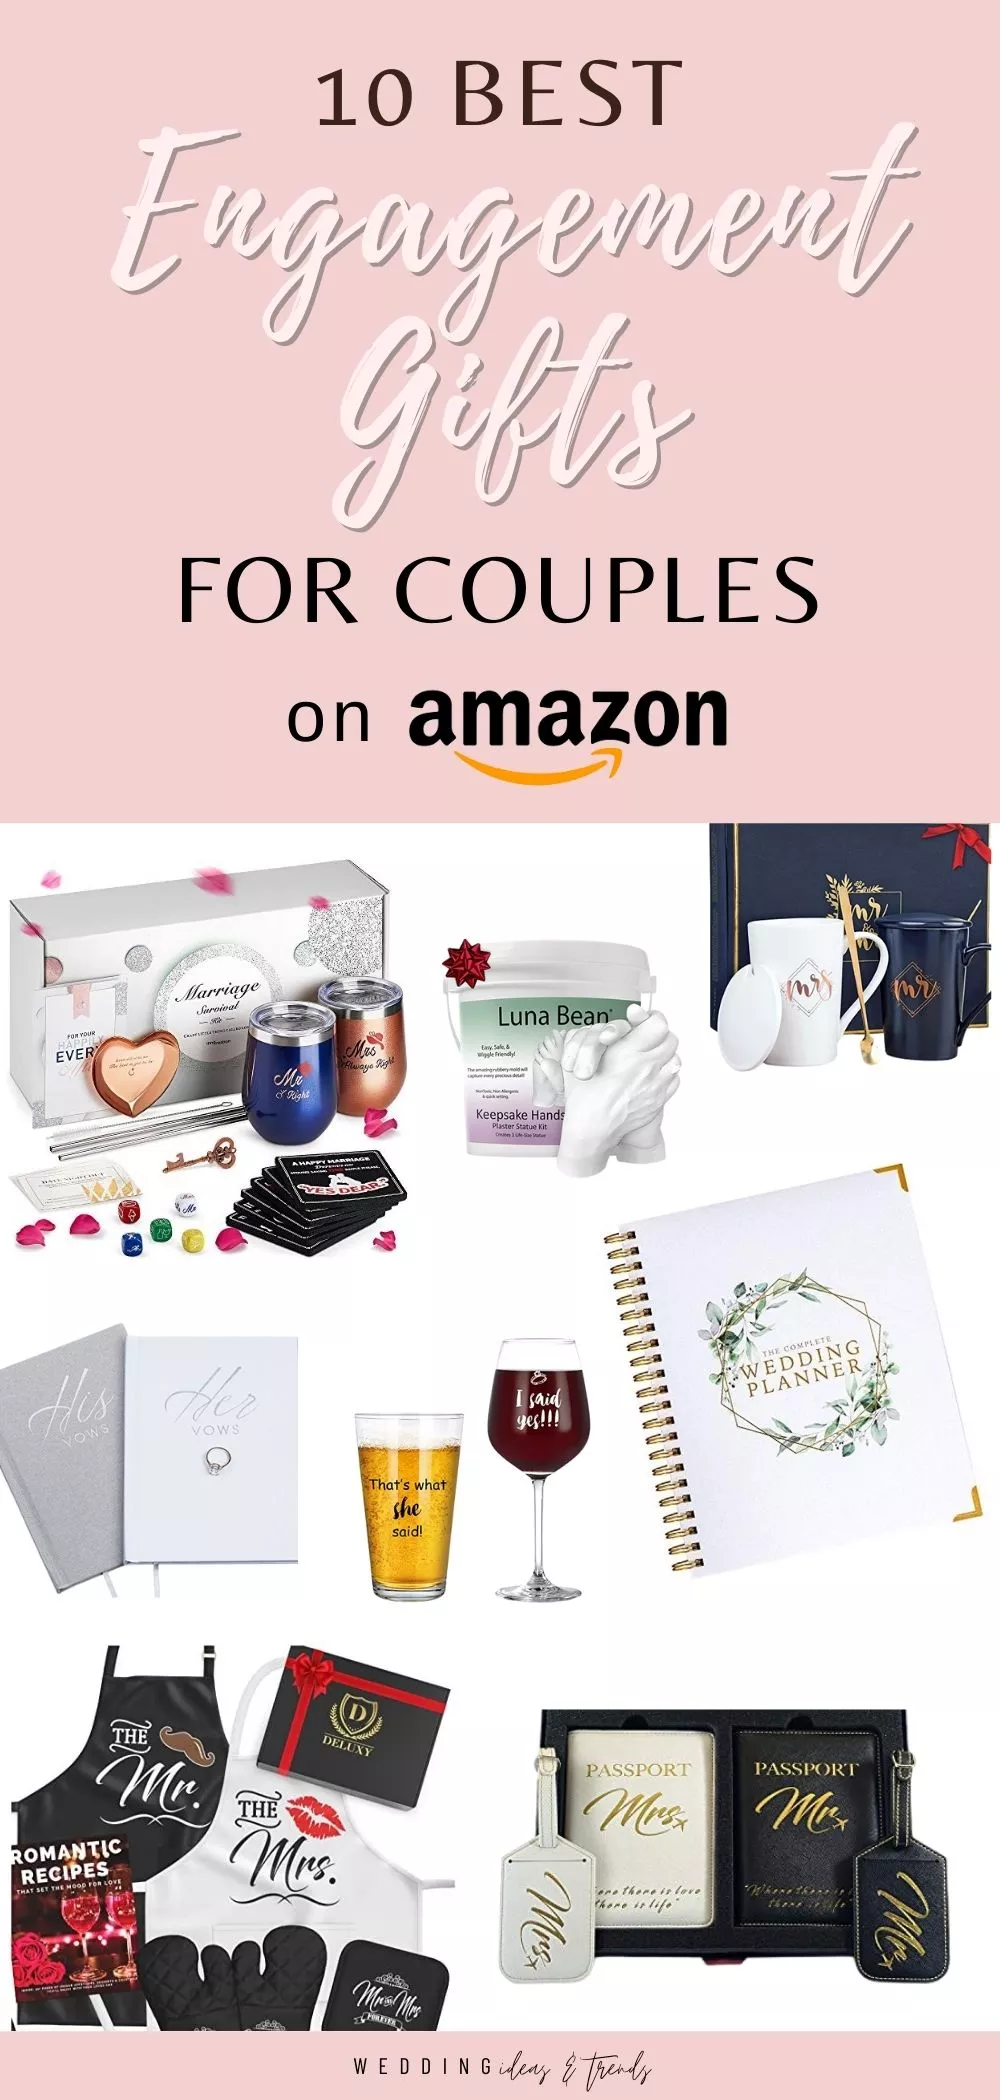 10 Best Engagement Gifts for Couples on Amazon